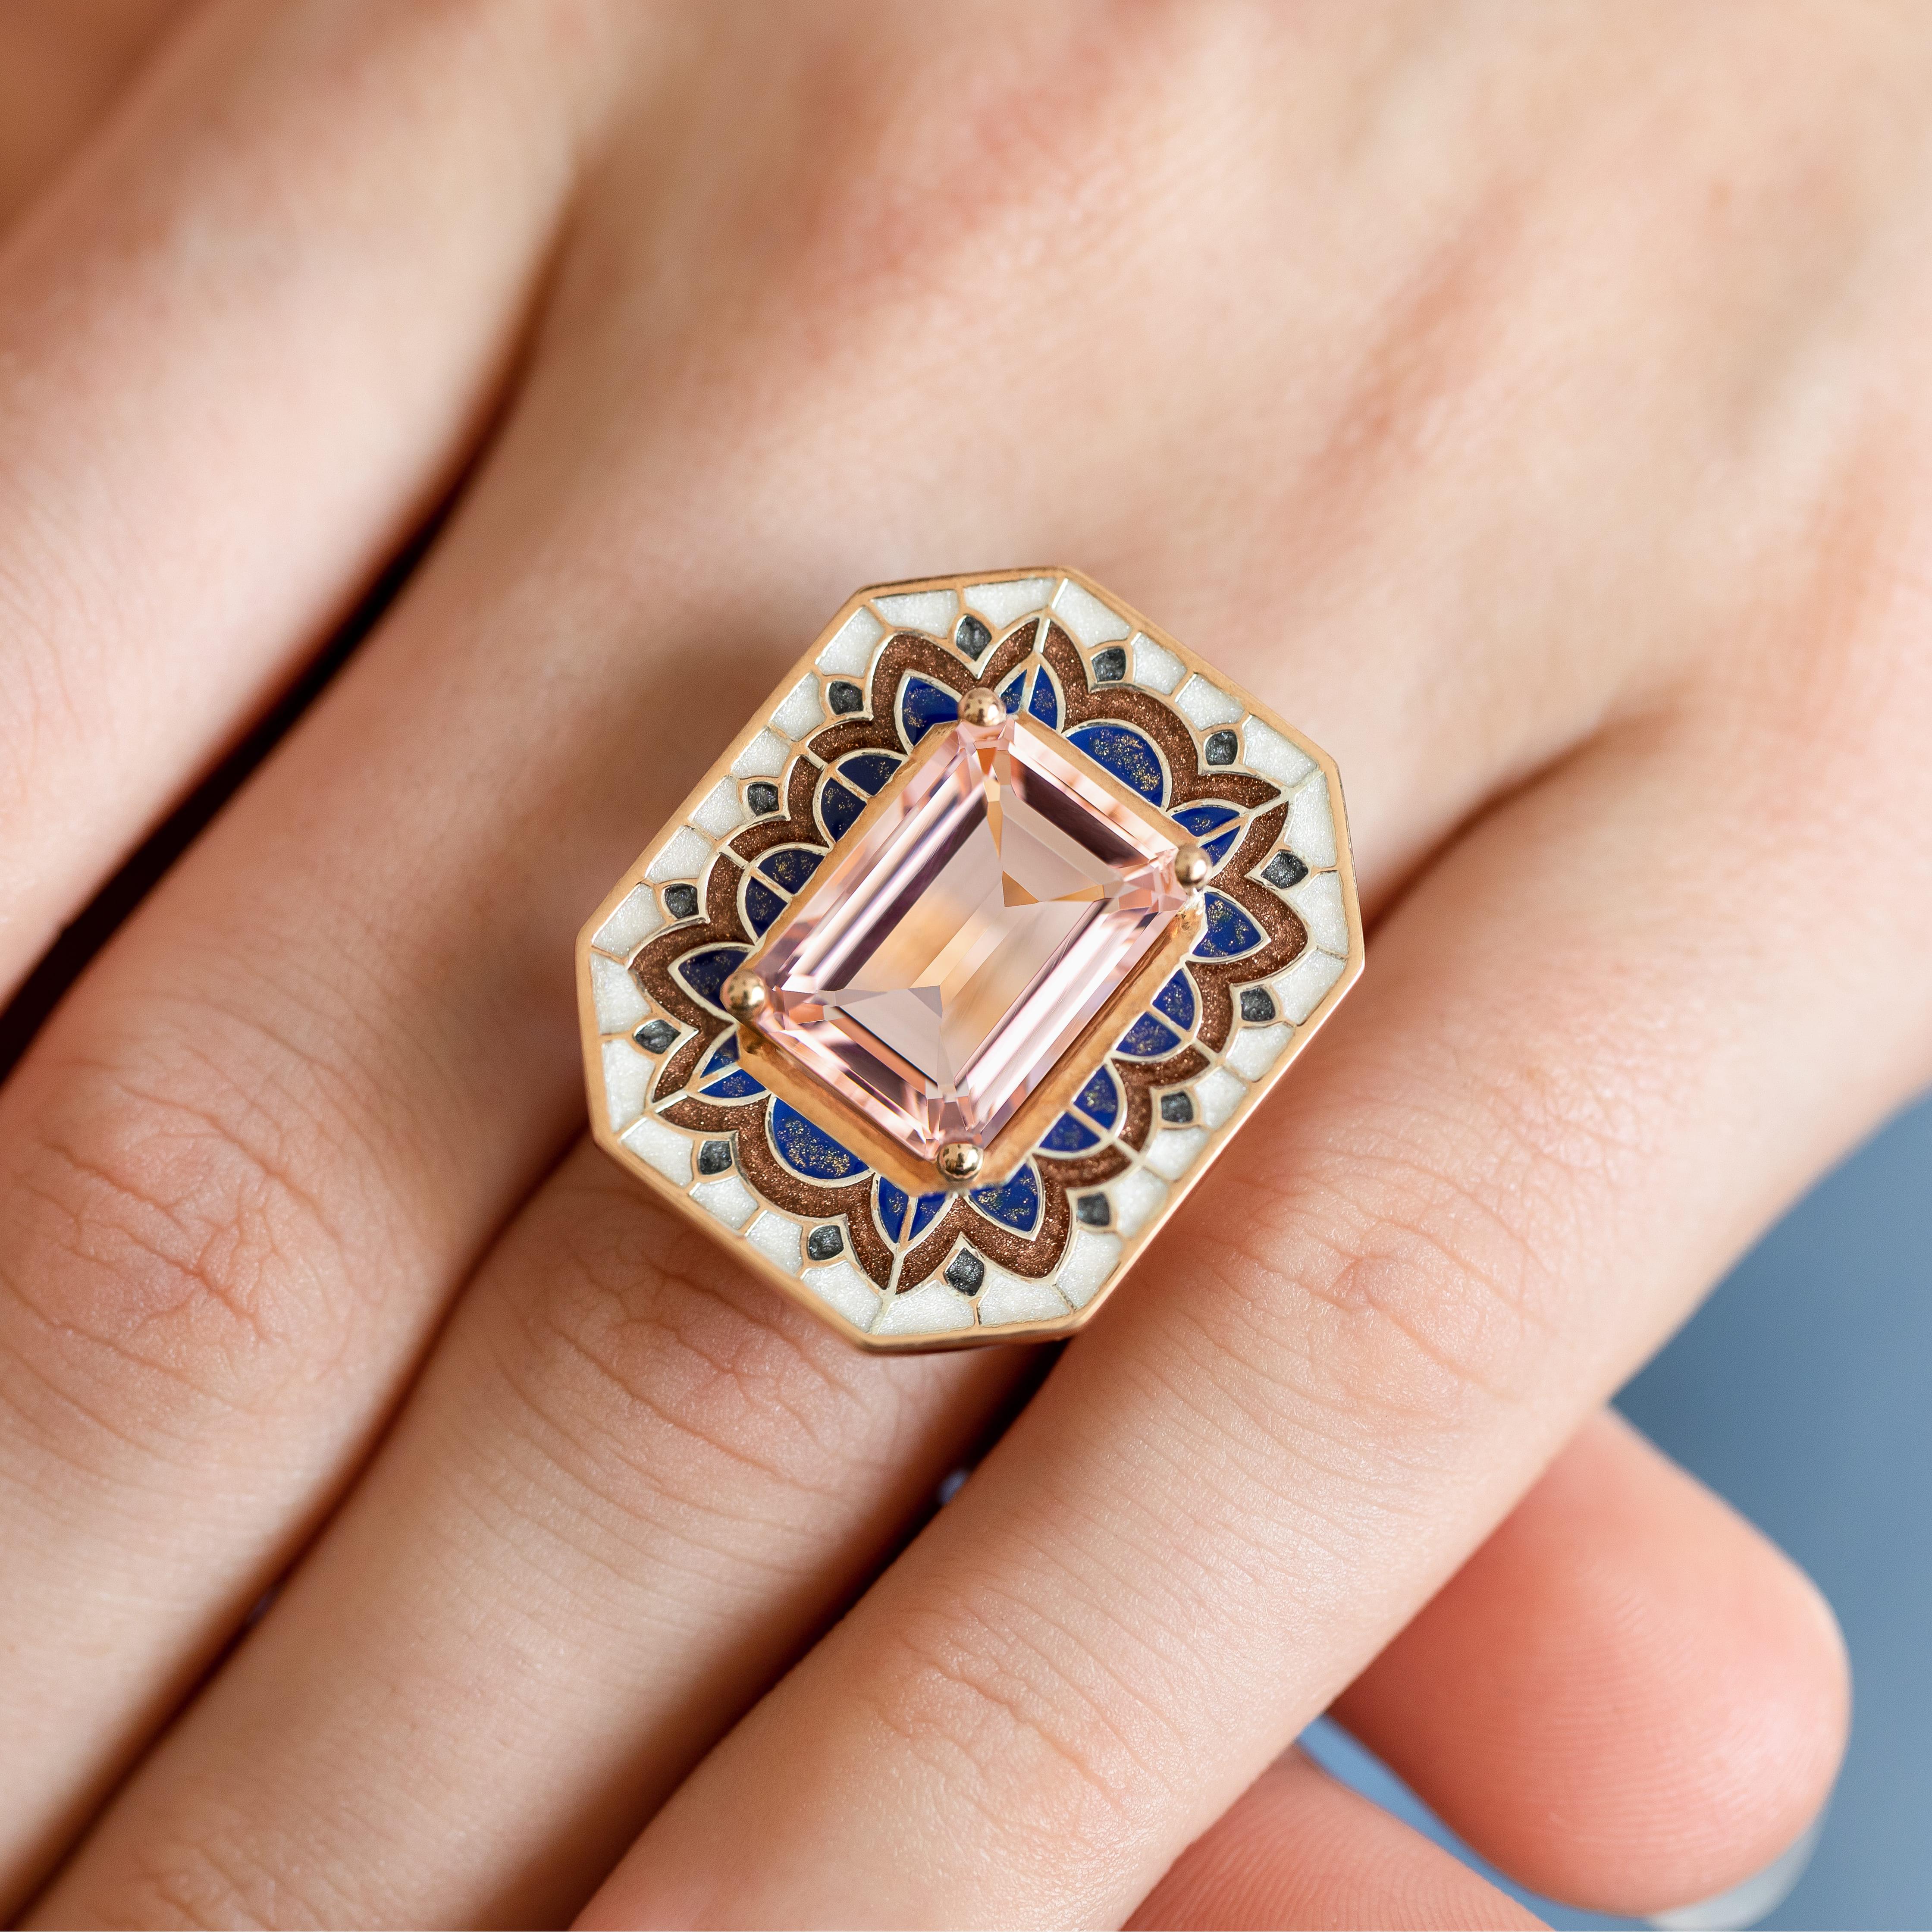 Emerald Cut Art Deco Style Ring, 6.00-7.00 Ct Morganite Stone and Colorful Enamel Ring For Sale